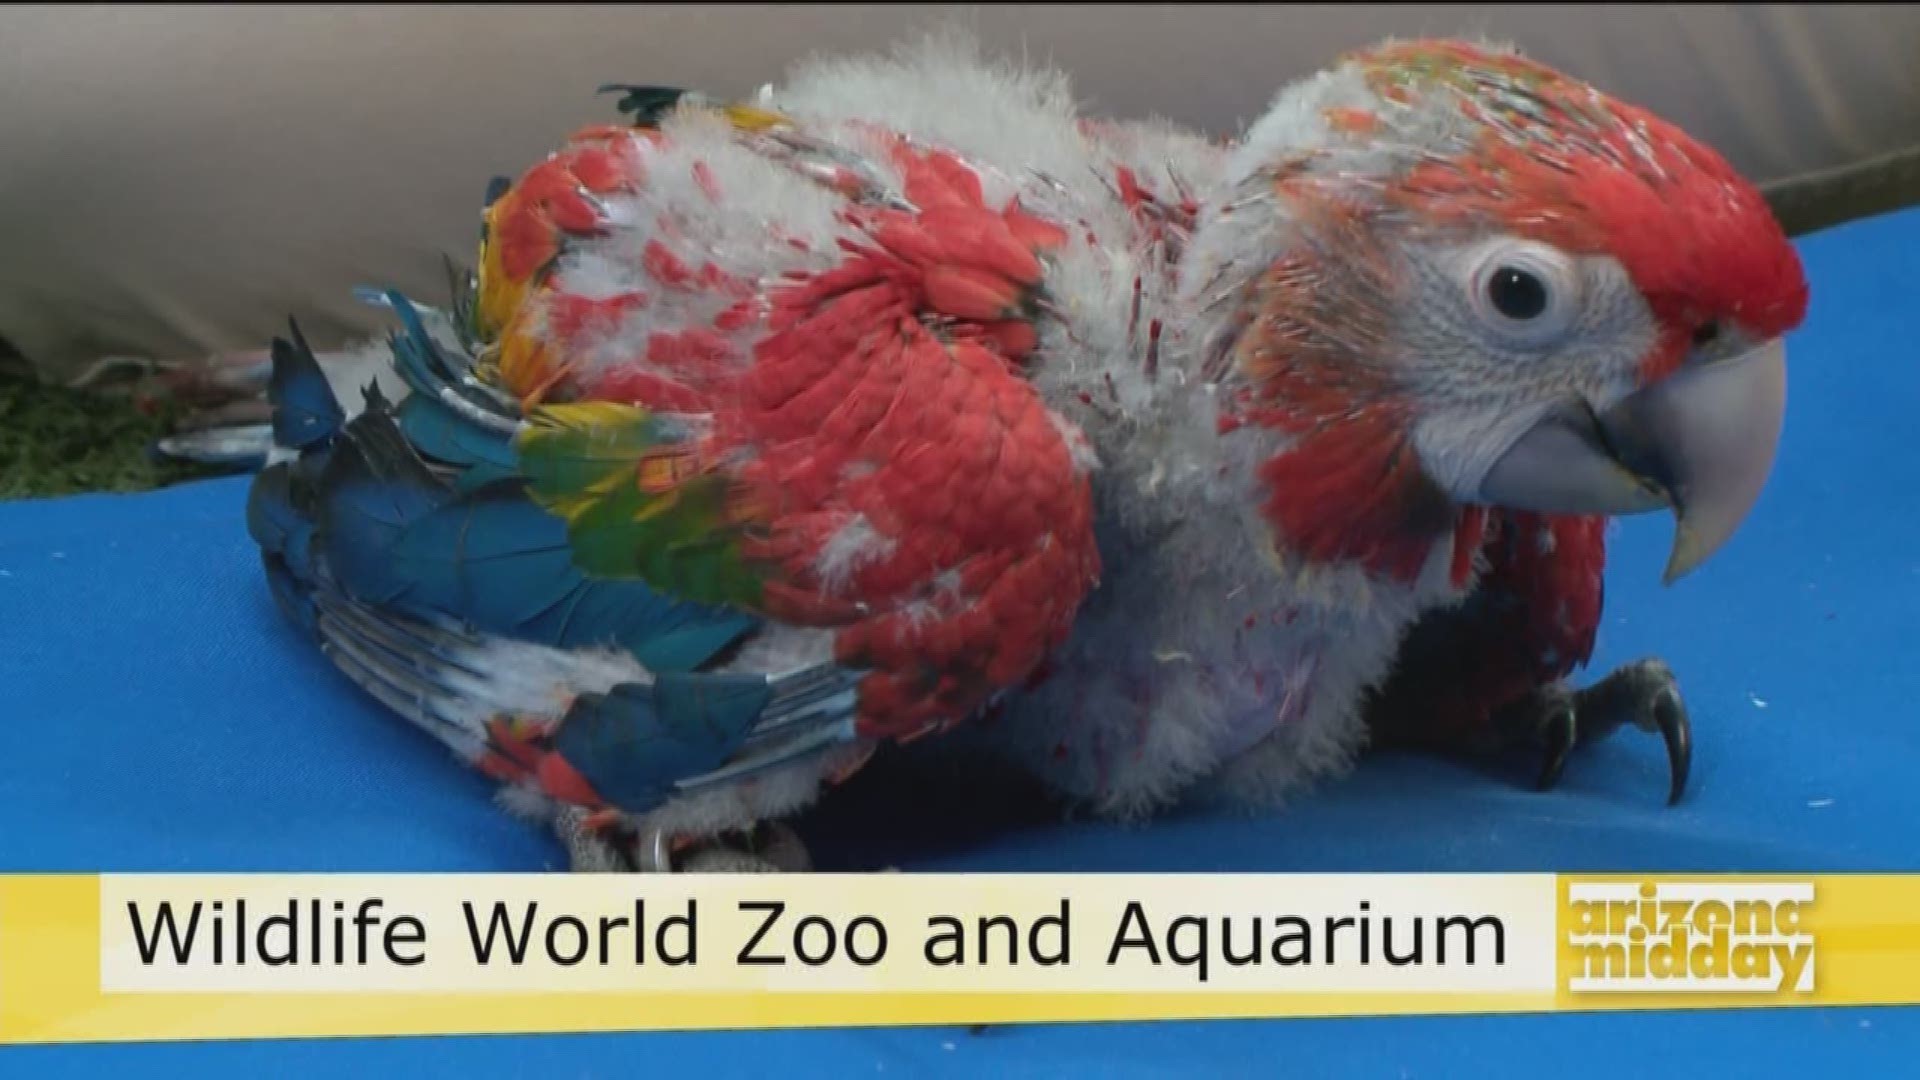 Meet an adorable baby macaw and get the scoop on the Wildlife World Zoo & Aquarium with Kristy Morcom.